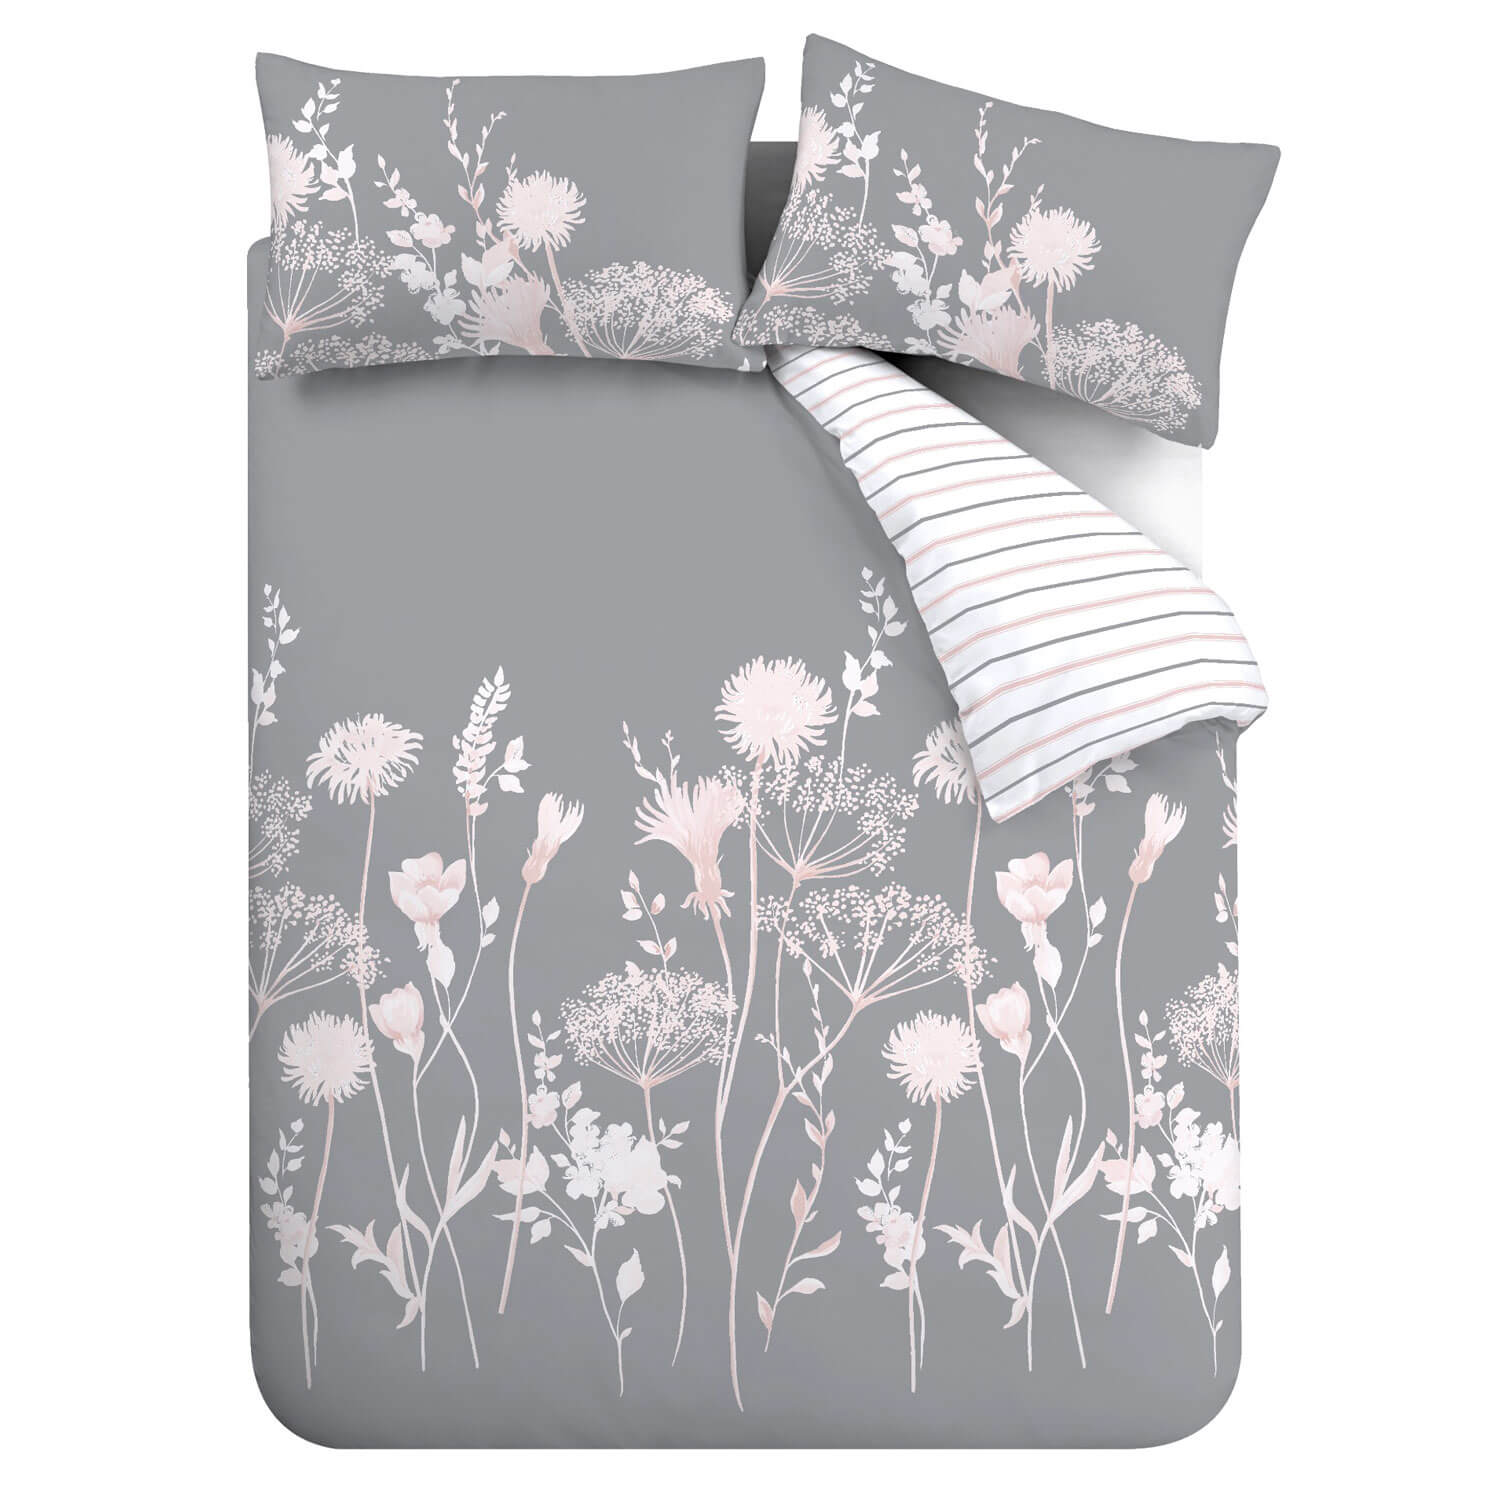  The Home Collection Meadowsweet Floral Duvet Cover Set - Super King 1 Shaws Department Stores